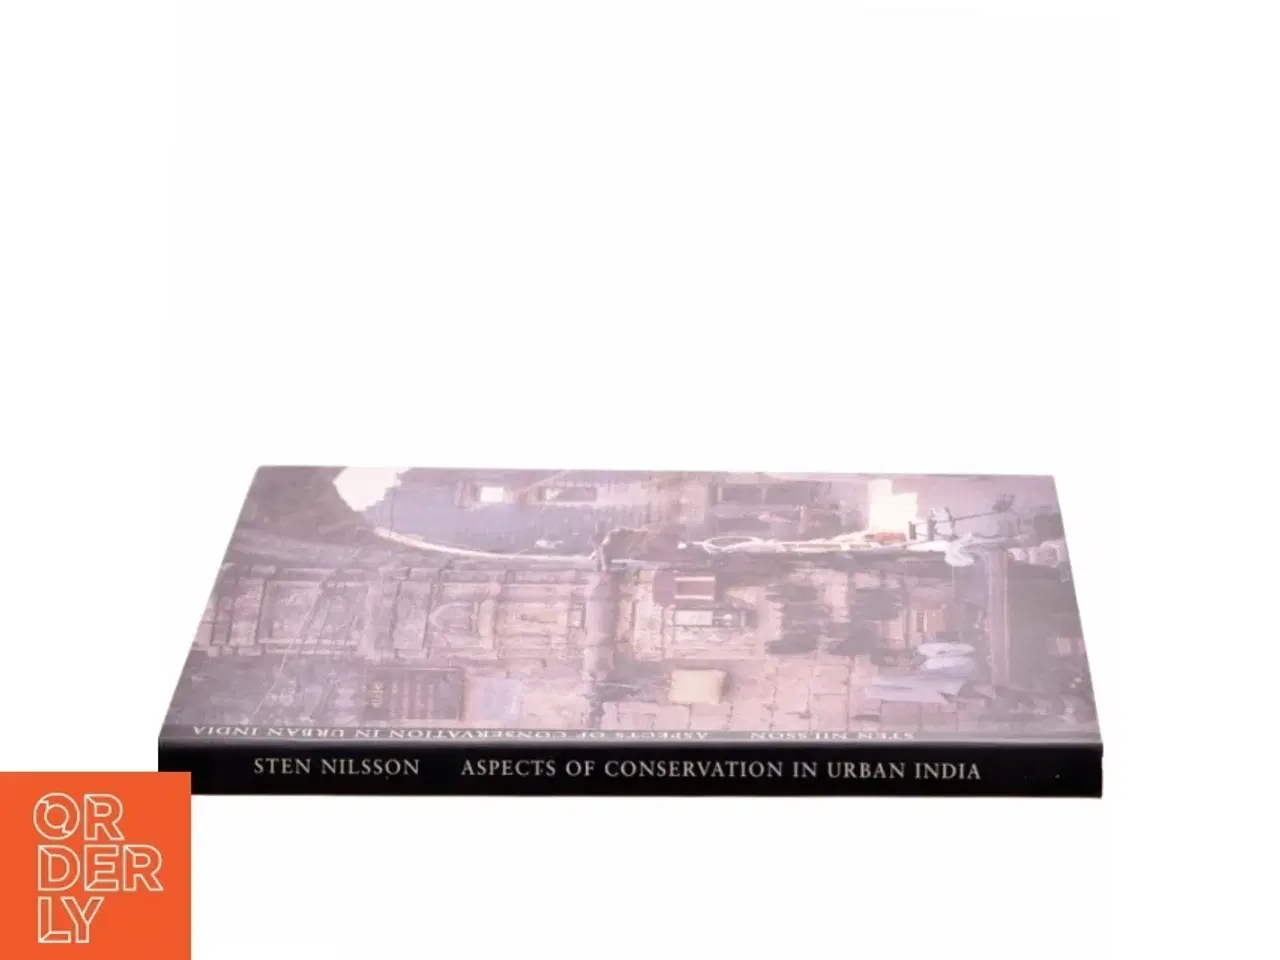 Billede 2 - Aspects of Conservation in Urban India by Sten Nilsson (Editor)